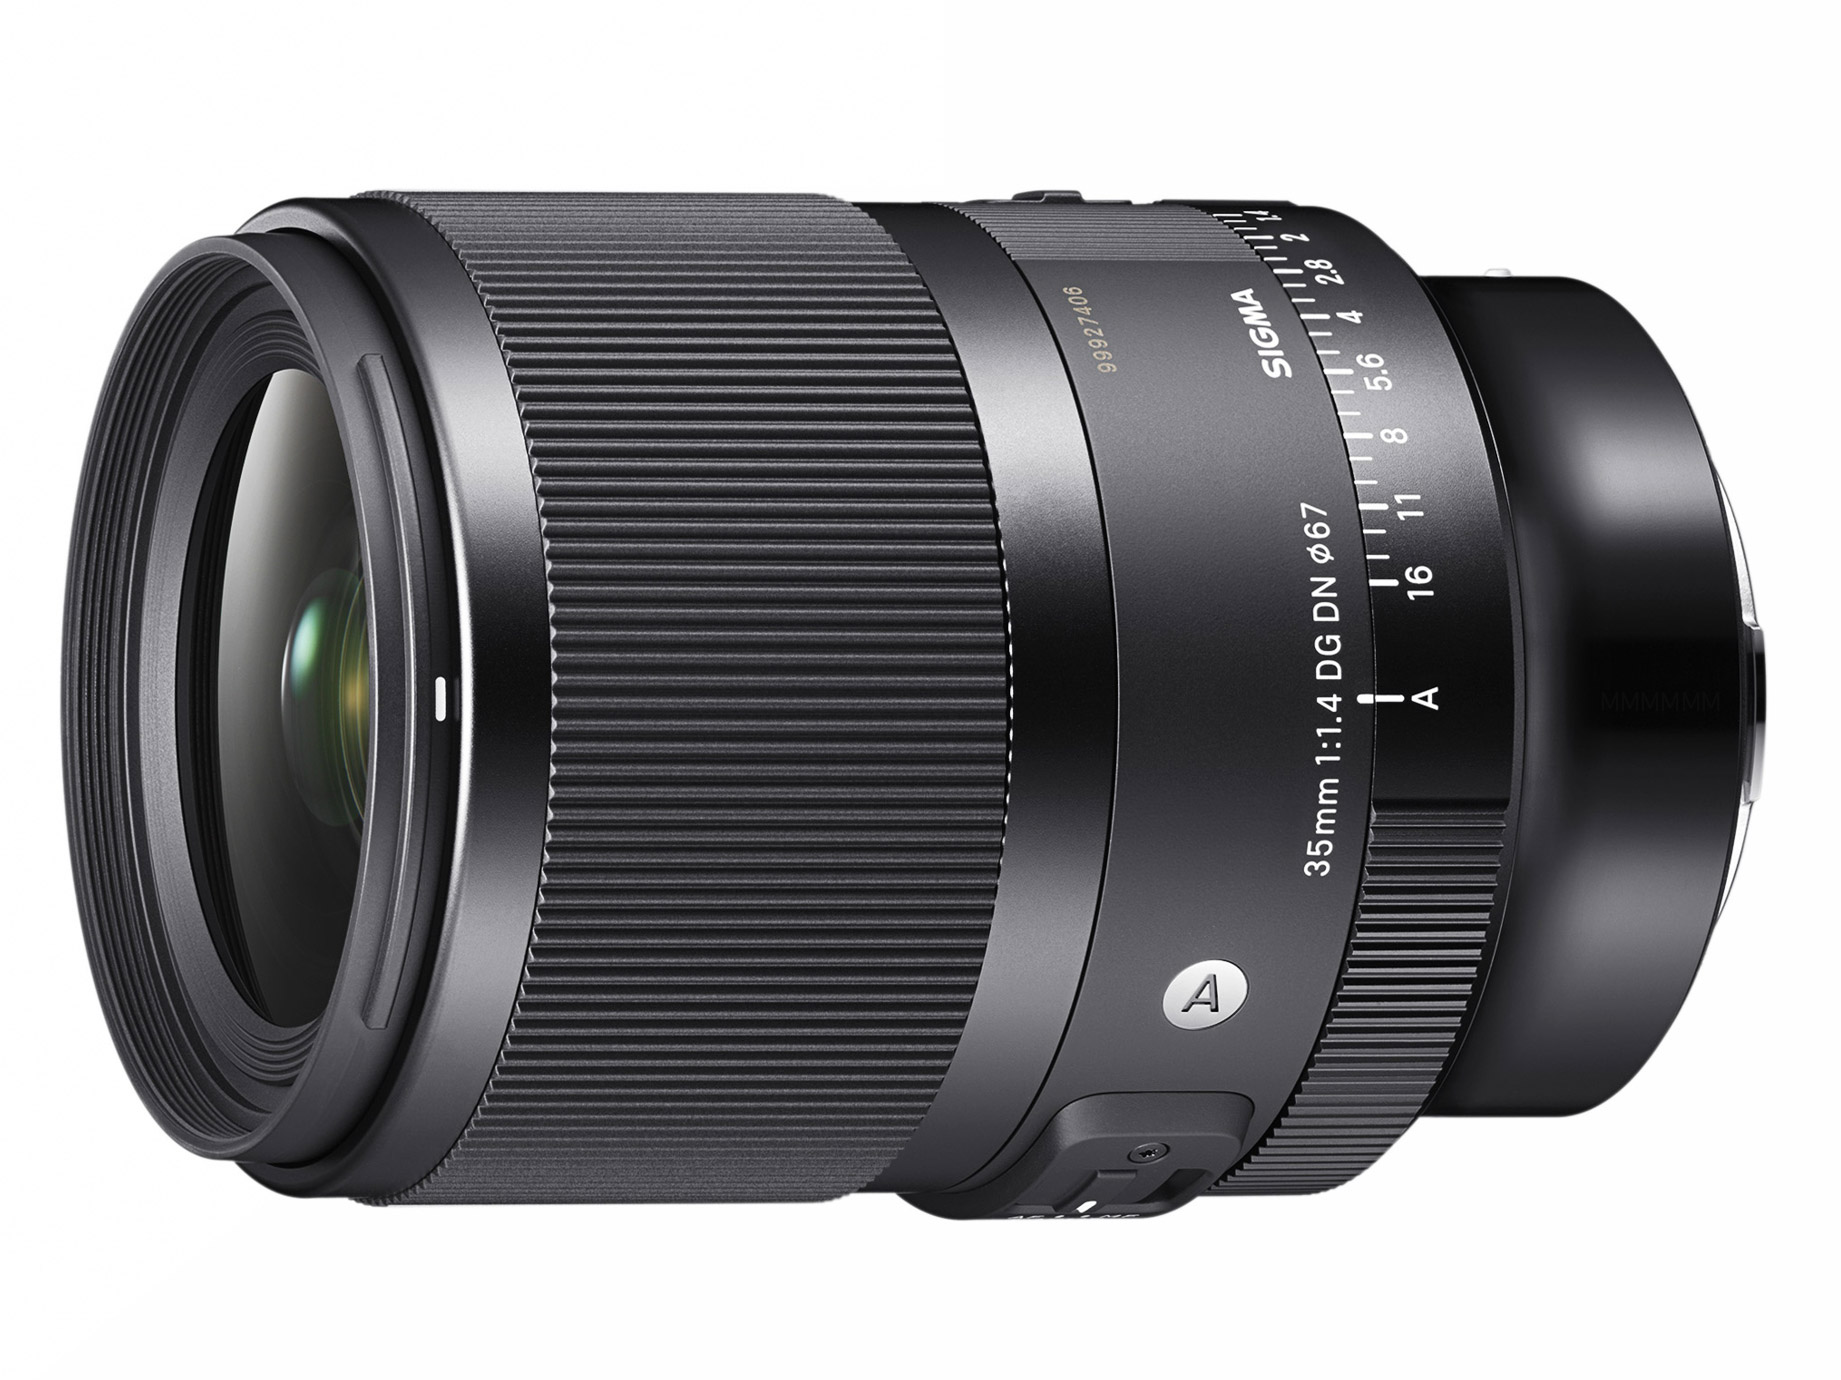 The Sigma 35mm f/1.4 DG DN Art Is Officially Announced